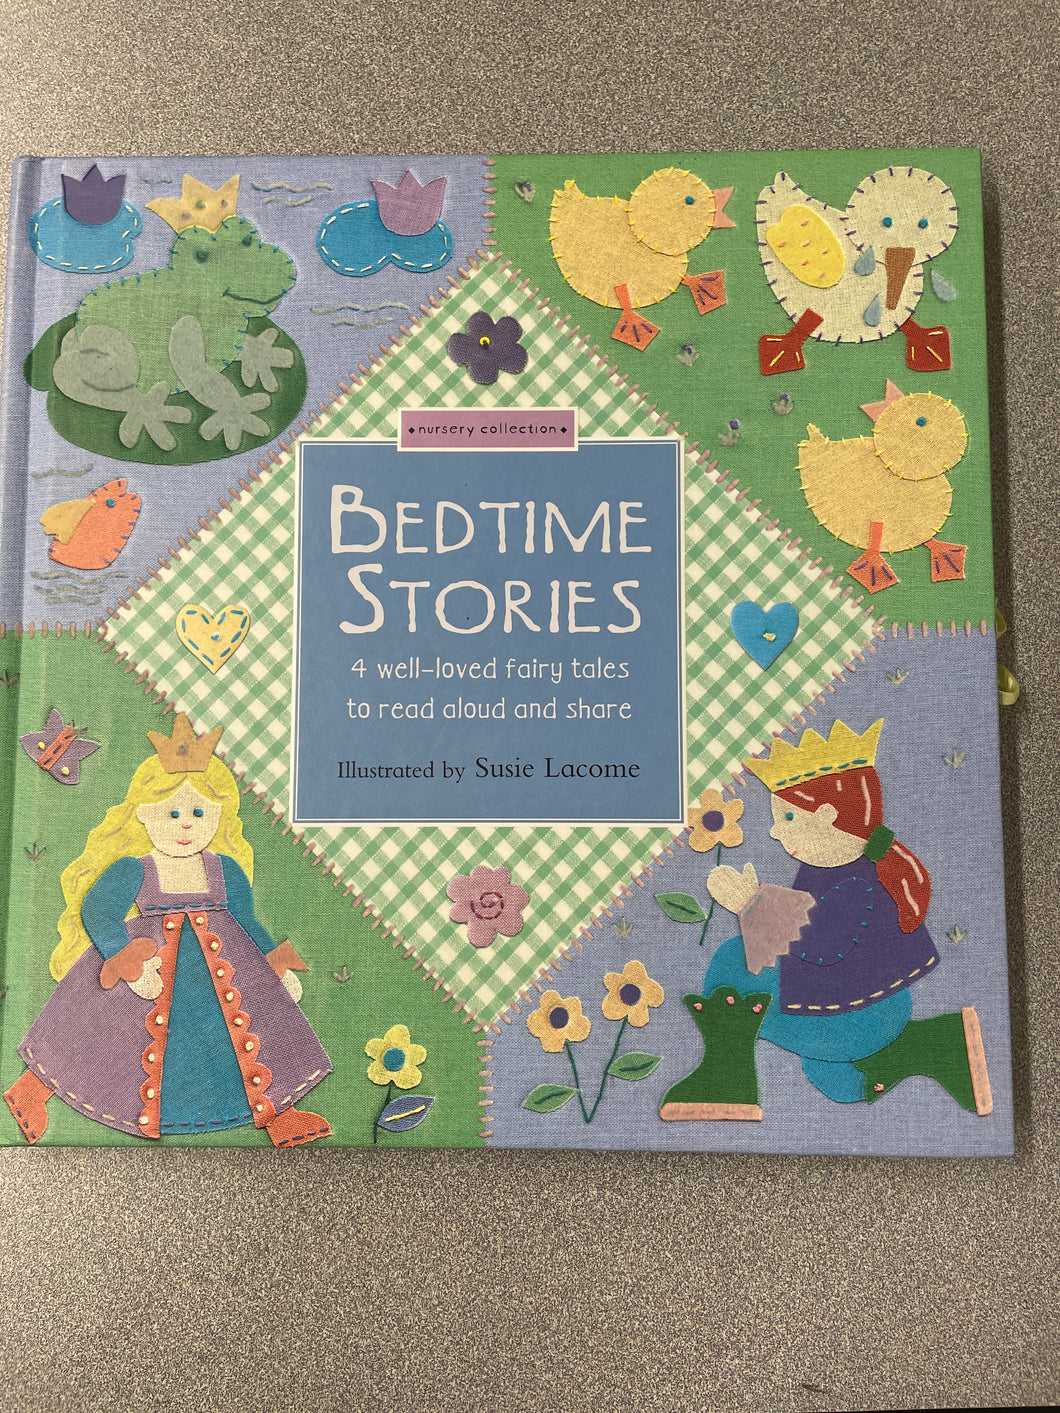 Bedtime Stories: 4 Well-Loved Fairy Tales to Read Aloud and Share, Harwood, Beth, ed., [2004] CP 2/24